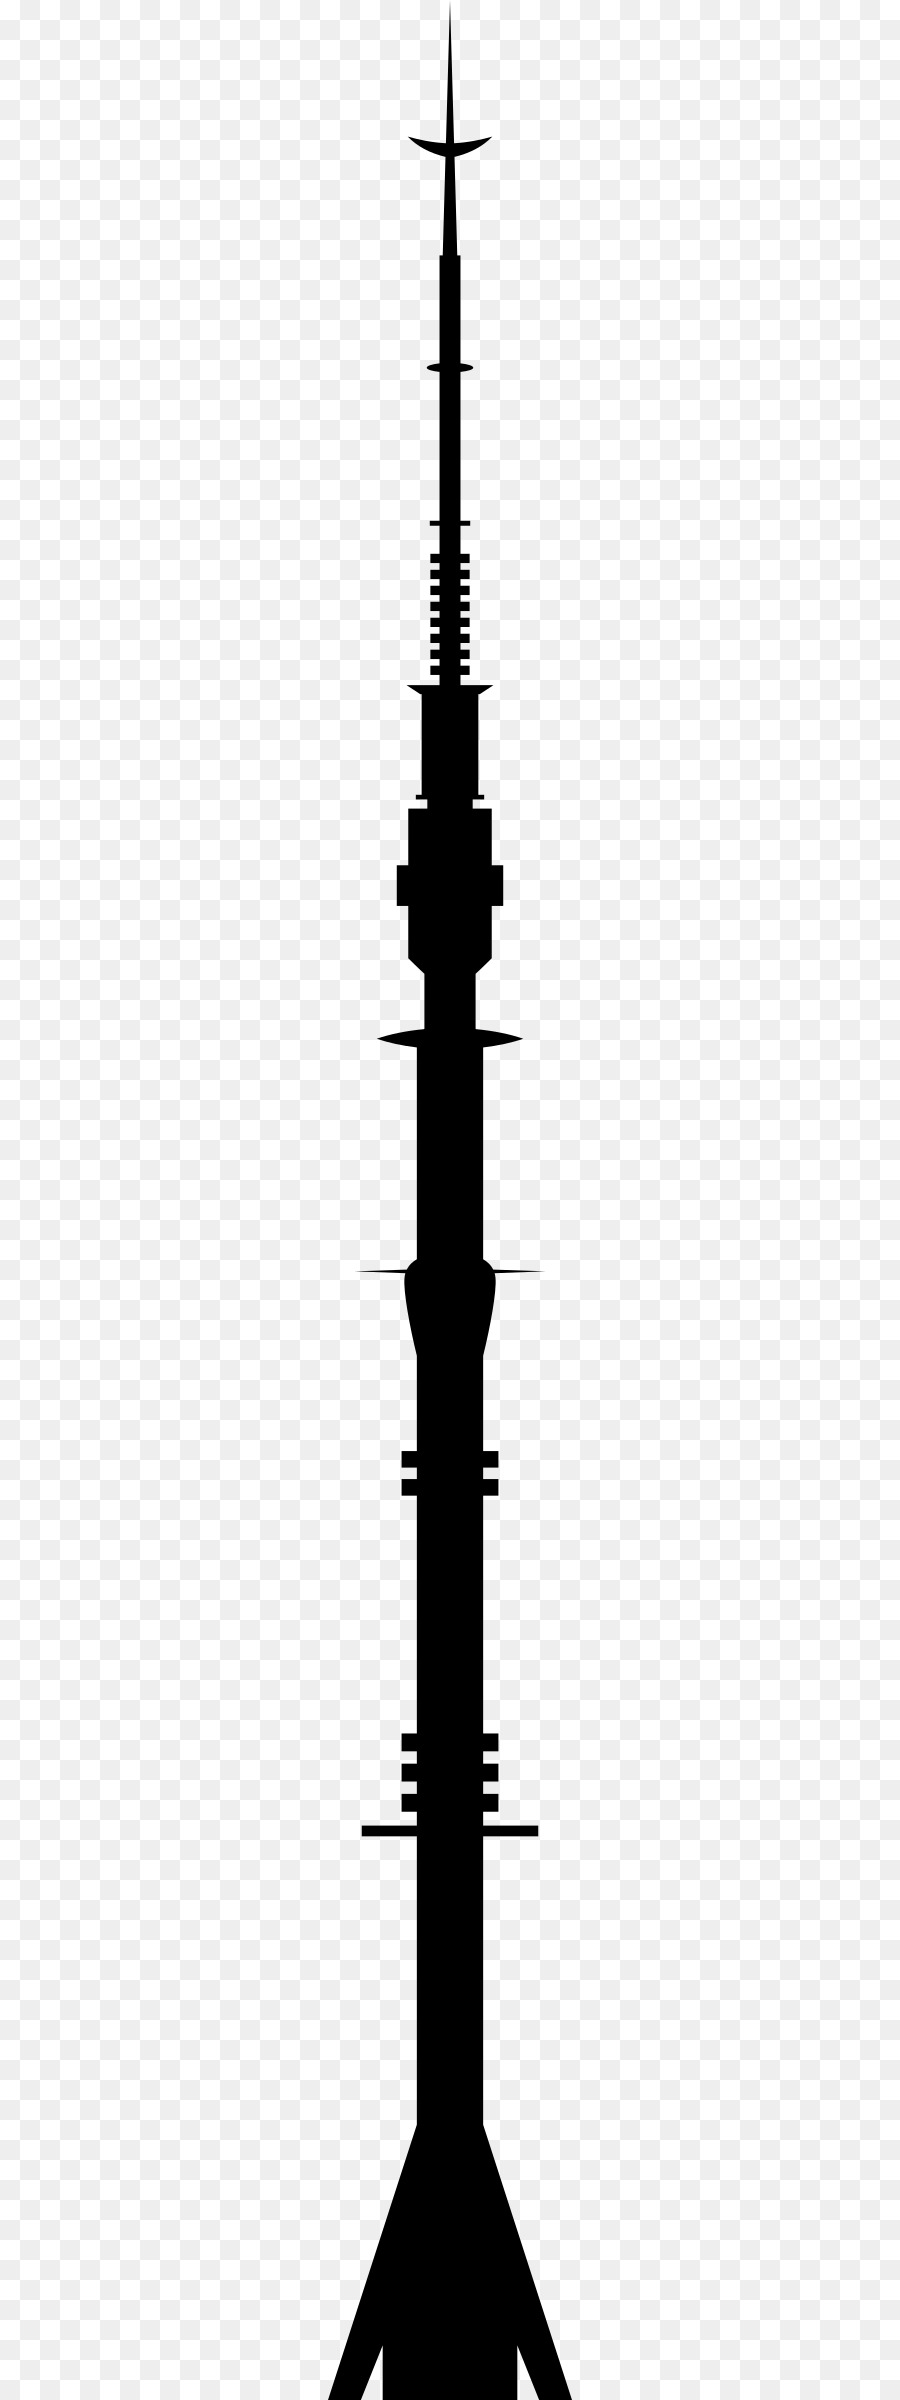 Ostankino Tower Silhouette Clip art - Silhouette png download - 244*2400 - Free Transparent Ostankino Tower png Download.